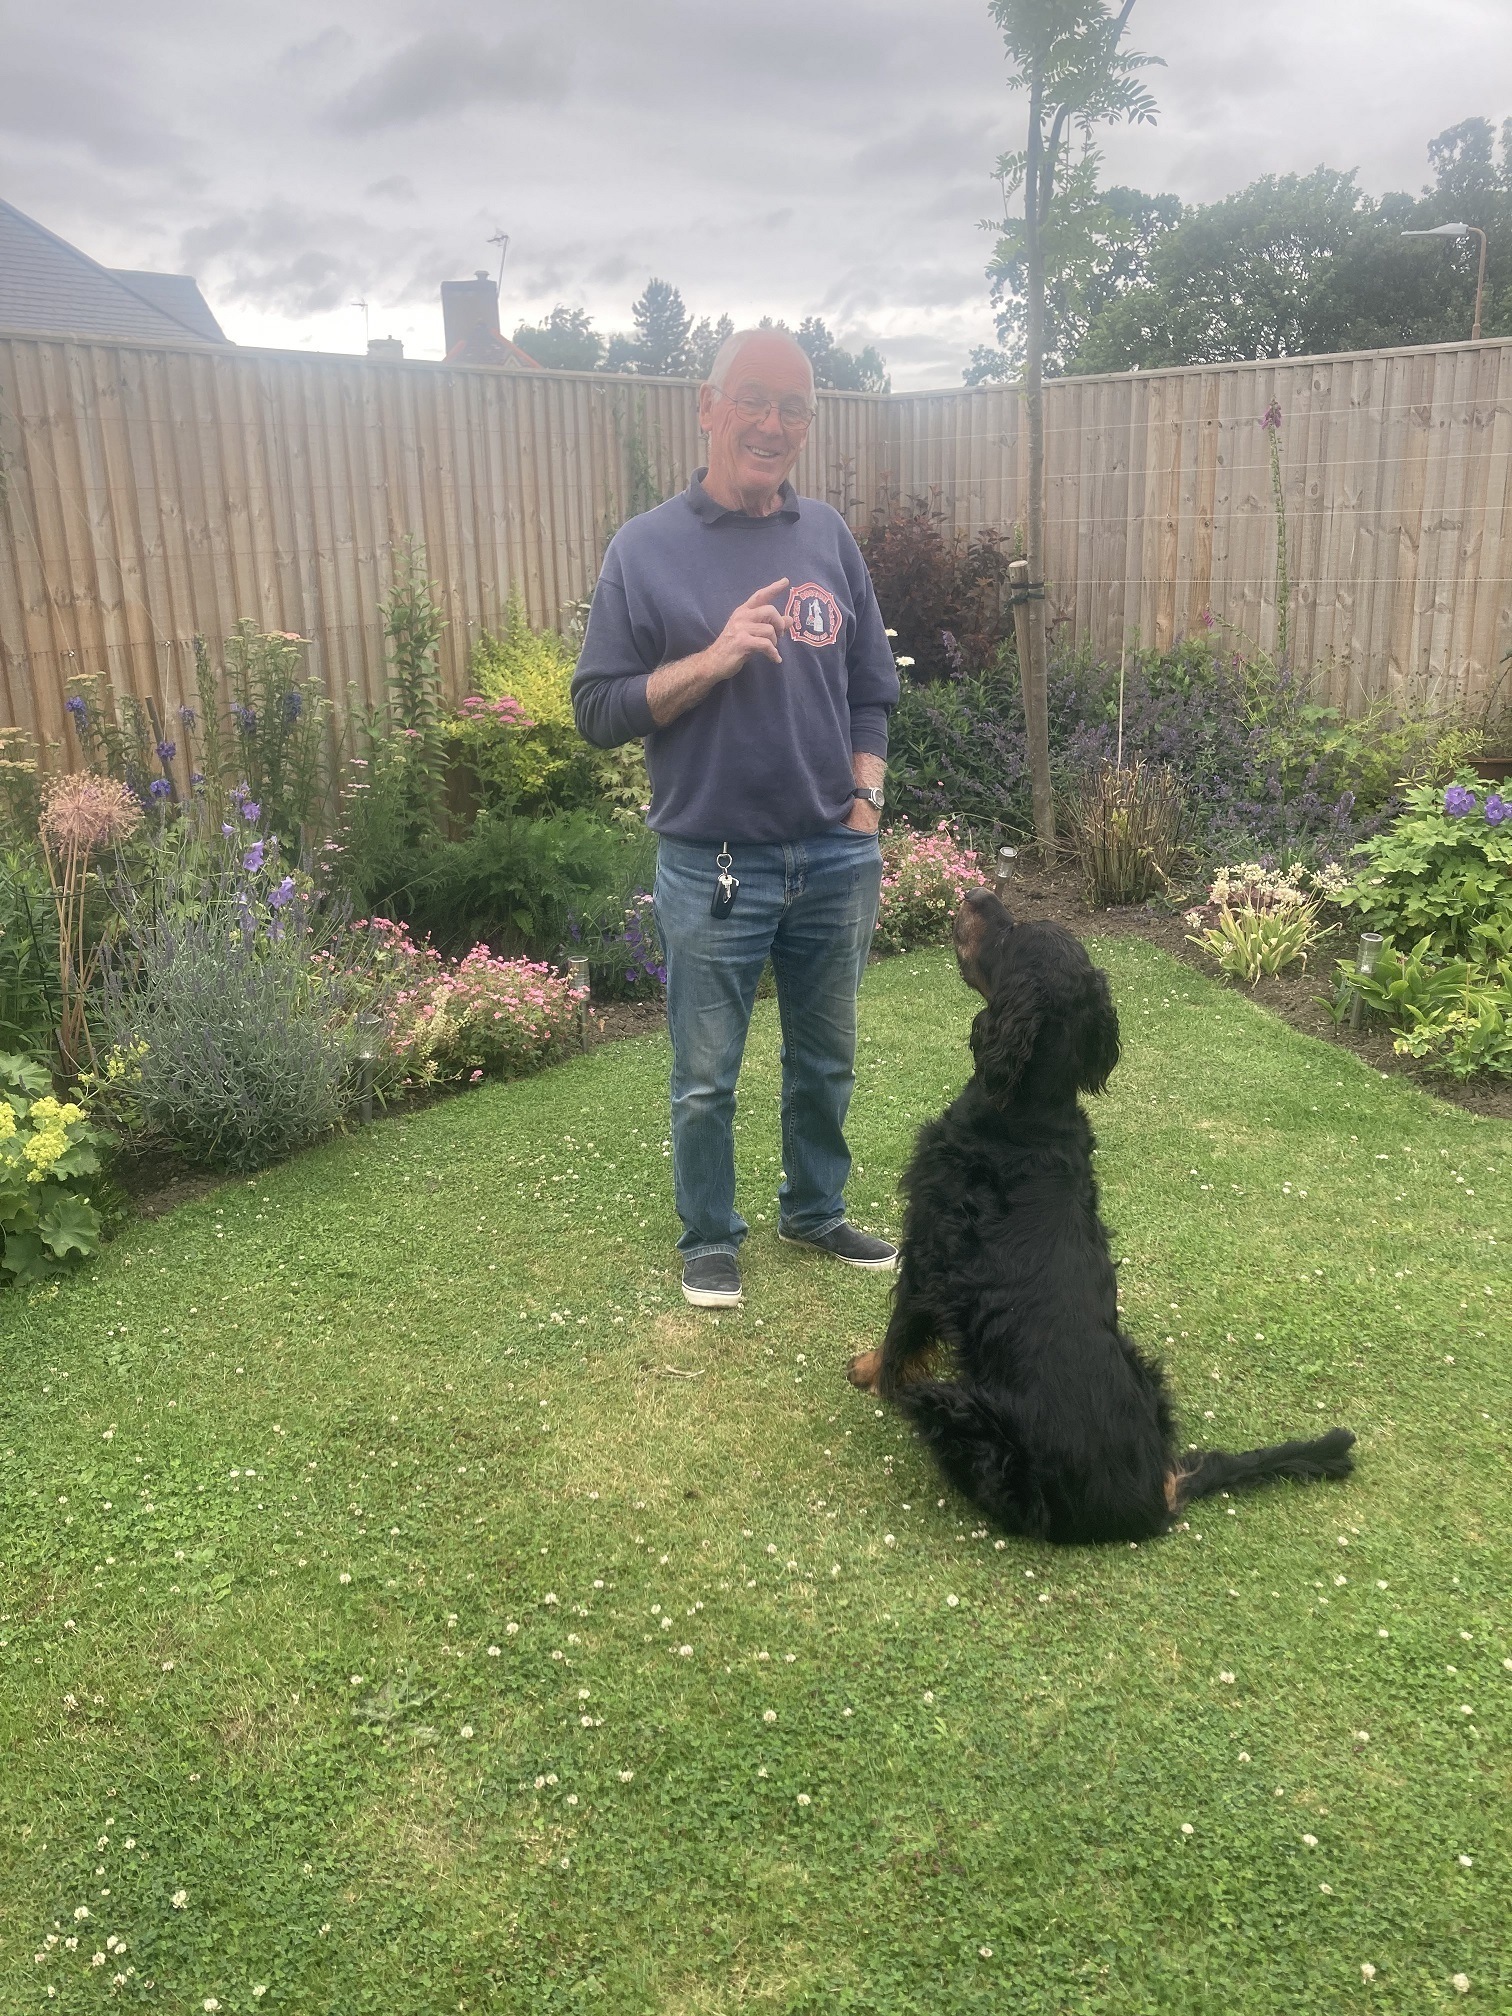 Ronald Anderson and the family dog Barclay enjoy their garden.